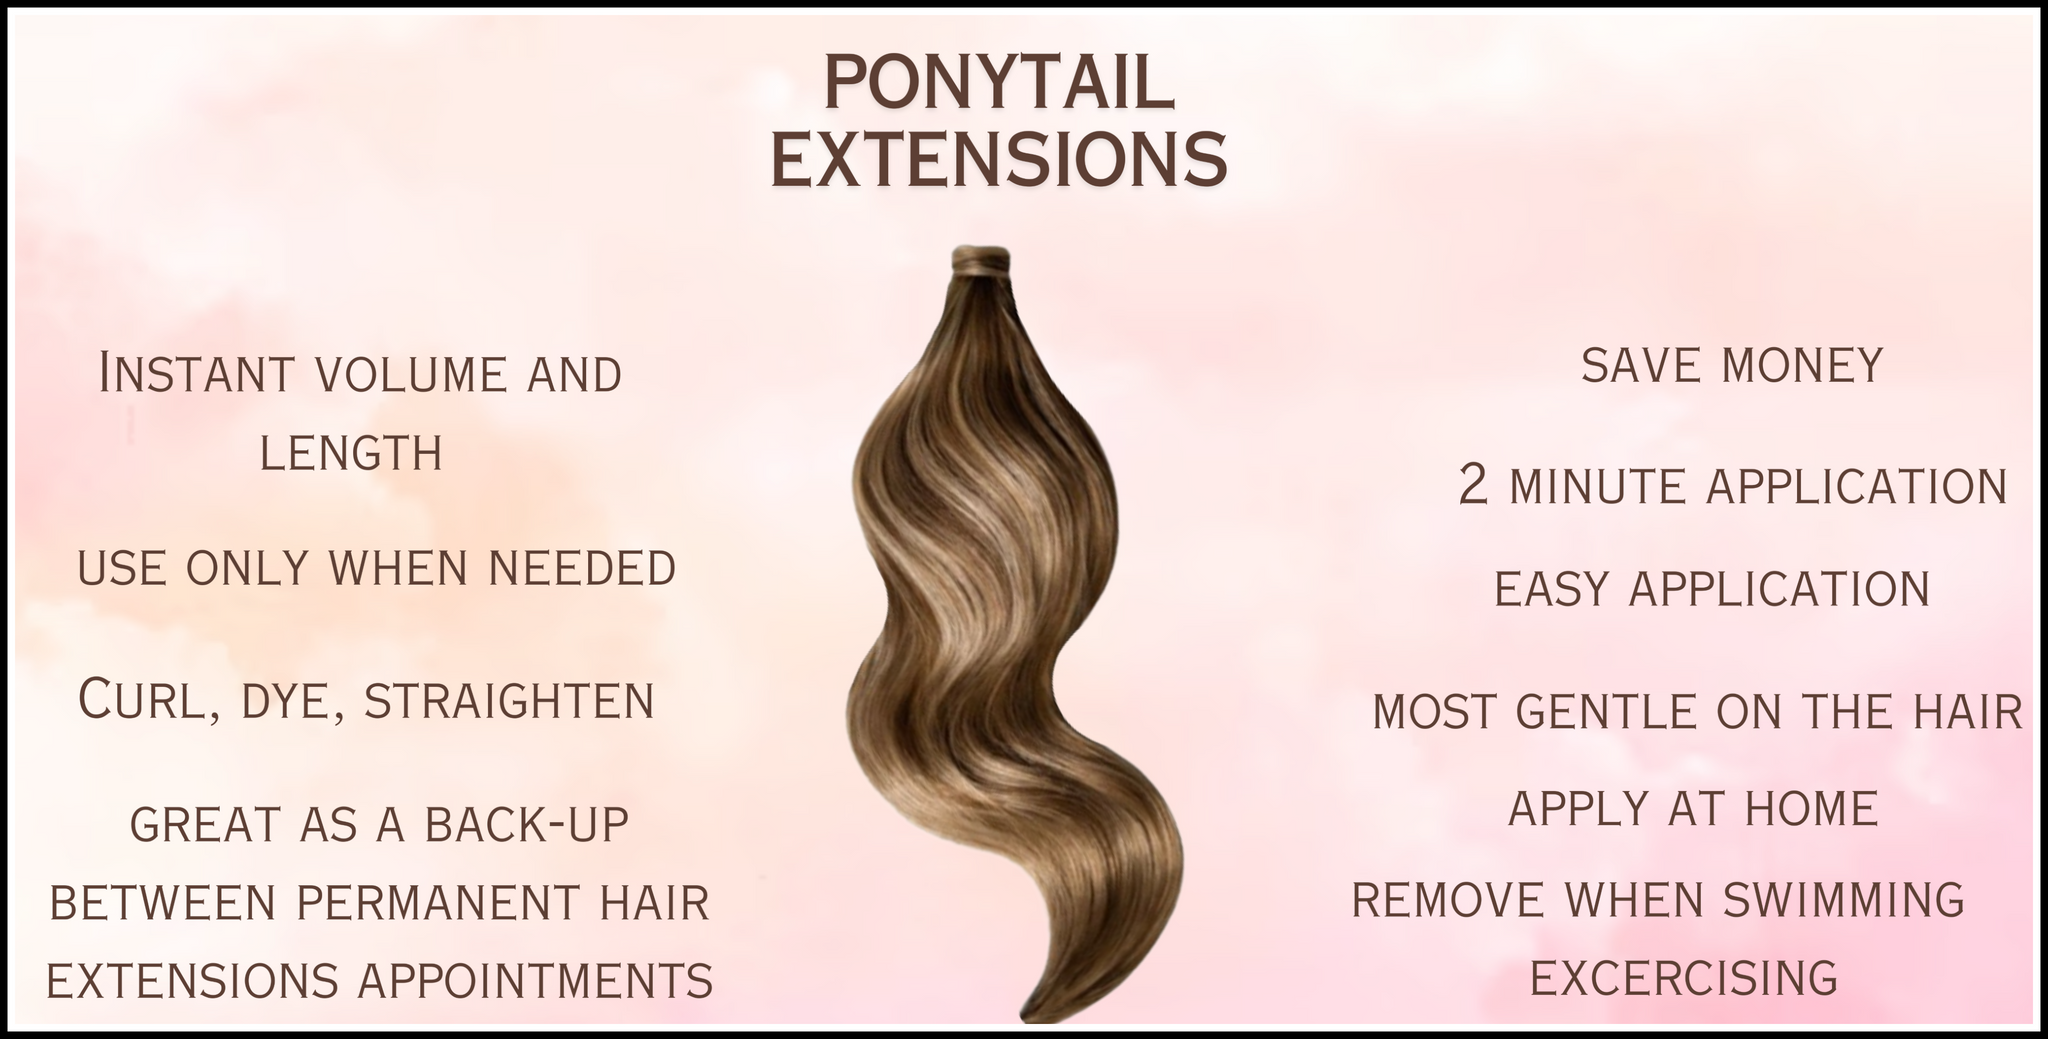 What are the benefits of ponytail hair extensions